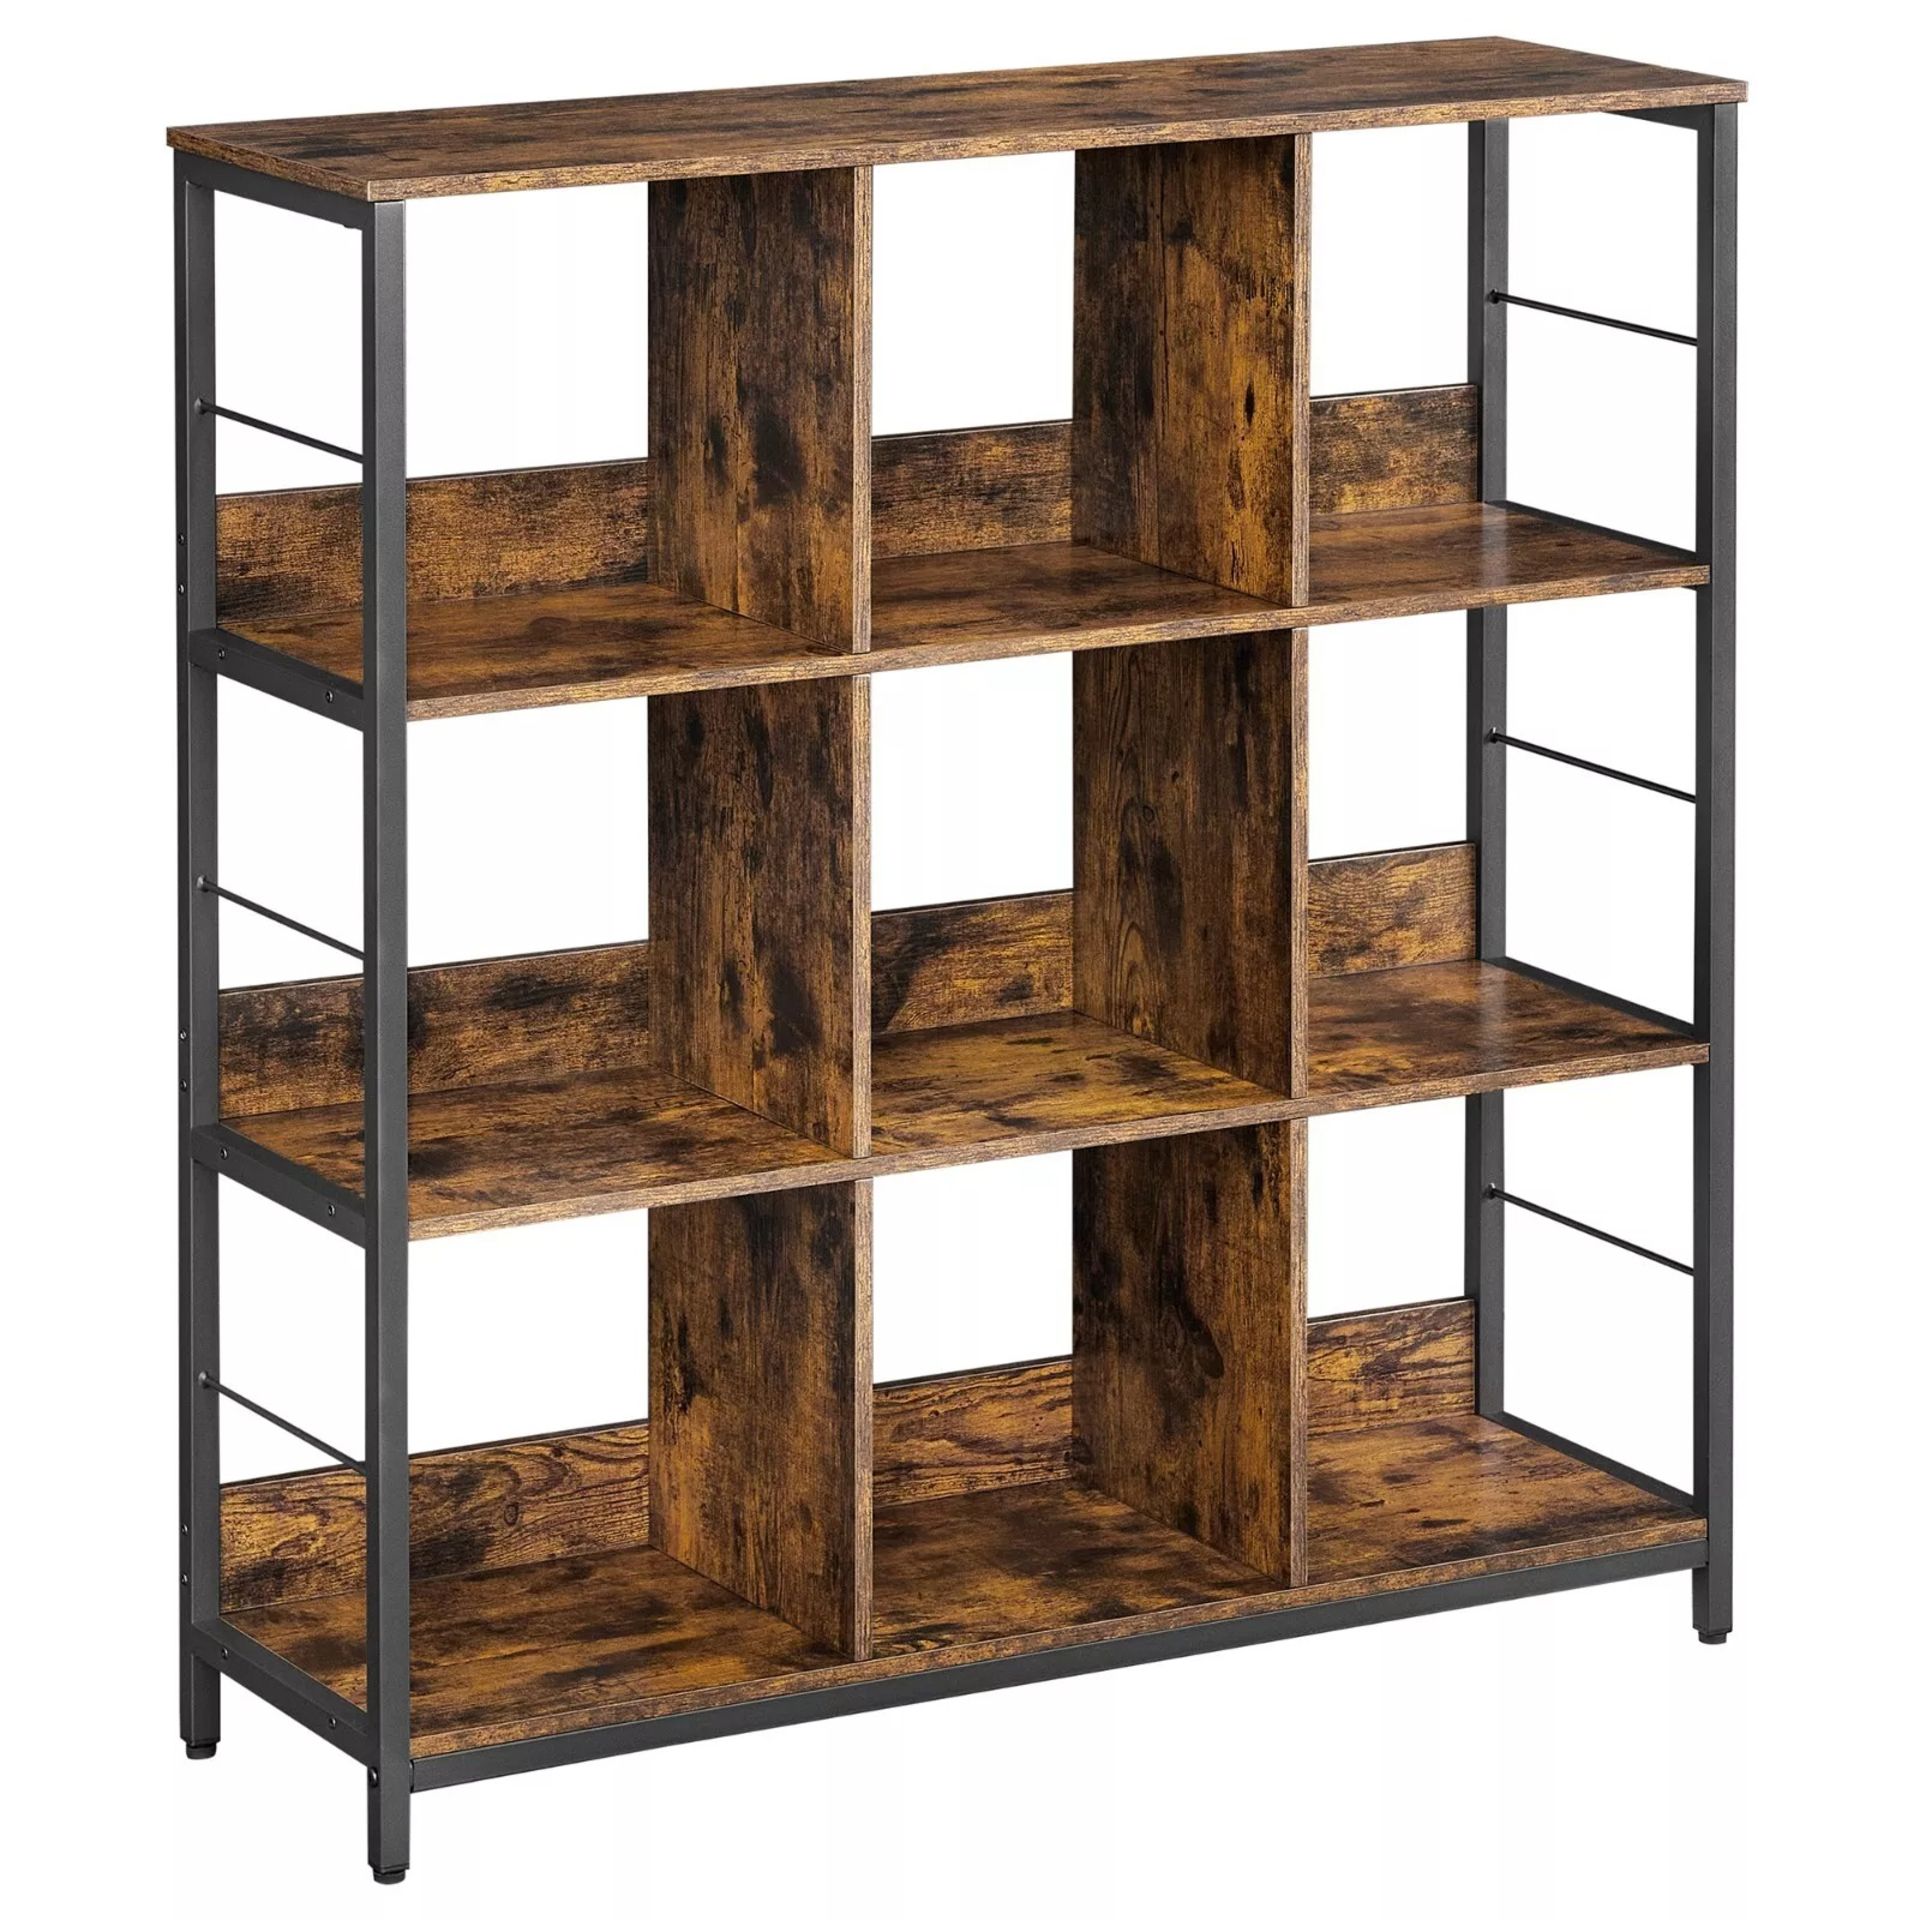 FREE DELIVERY - BRAND NEW BOOKSHELF BOOKCASE COMPARTMENTS STORAGE SHELVING RUSTIC BROWN BLACK